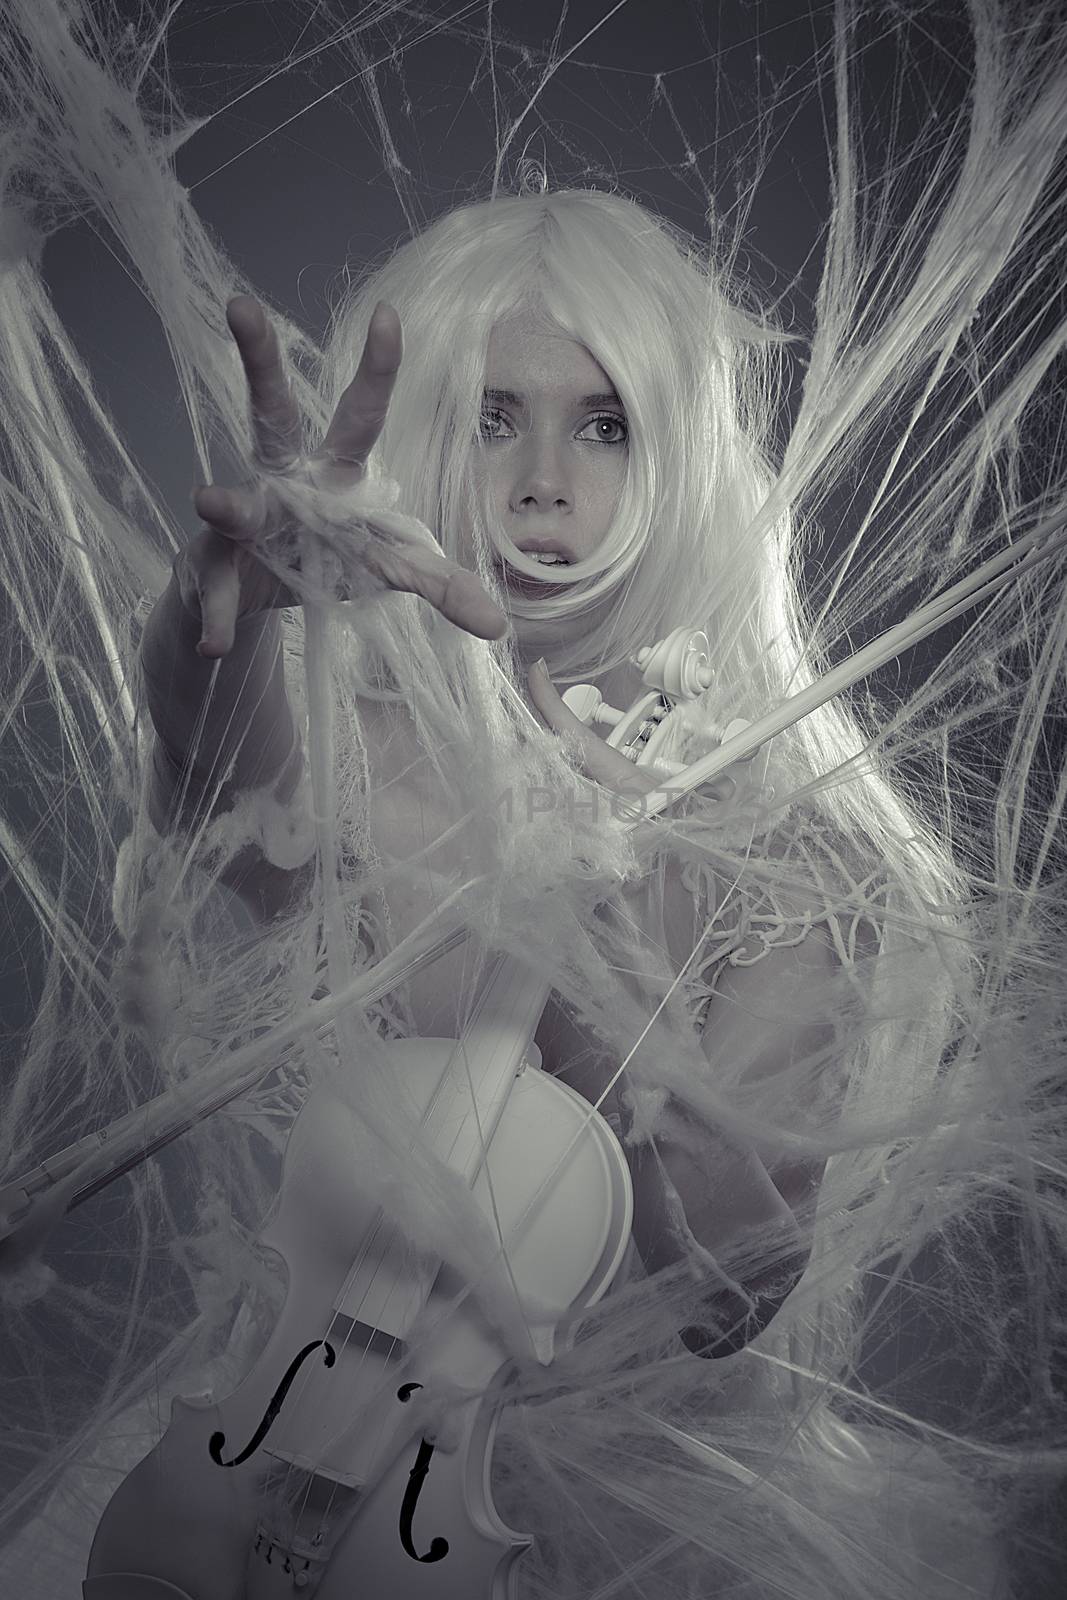 Music, beautiful woman trapped in a spider web with a white violin, lace dress